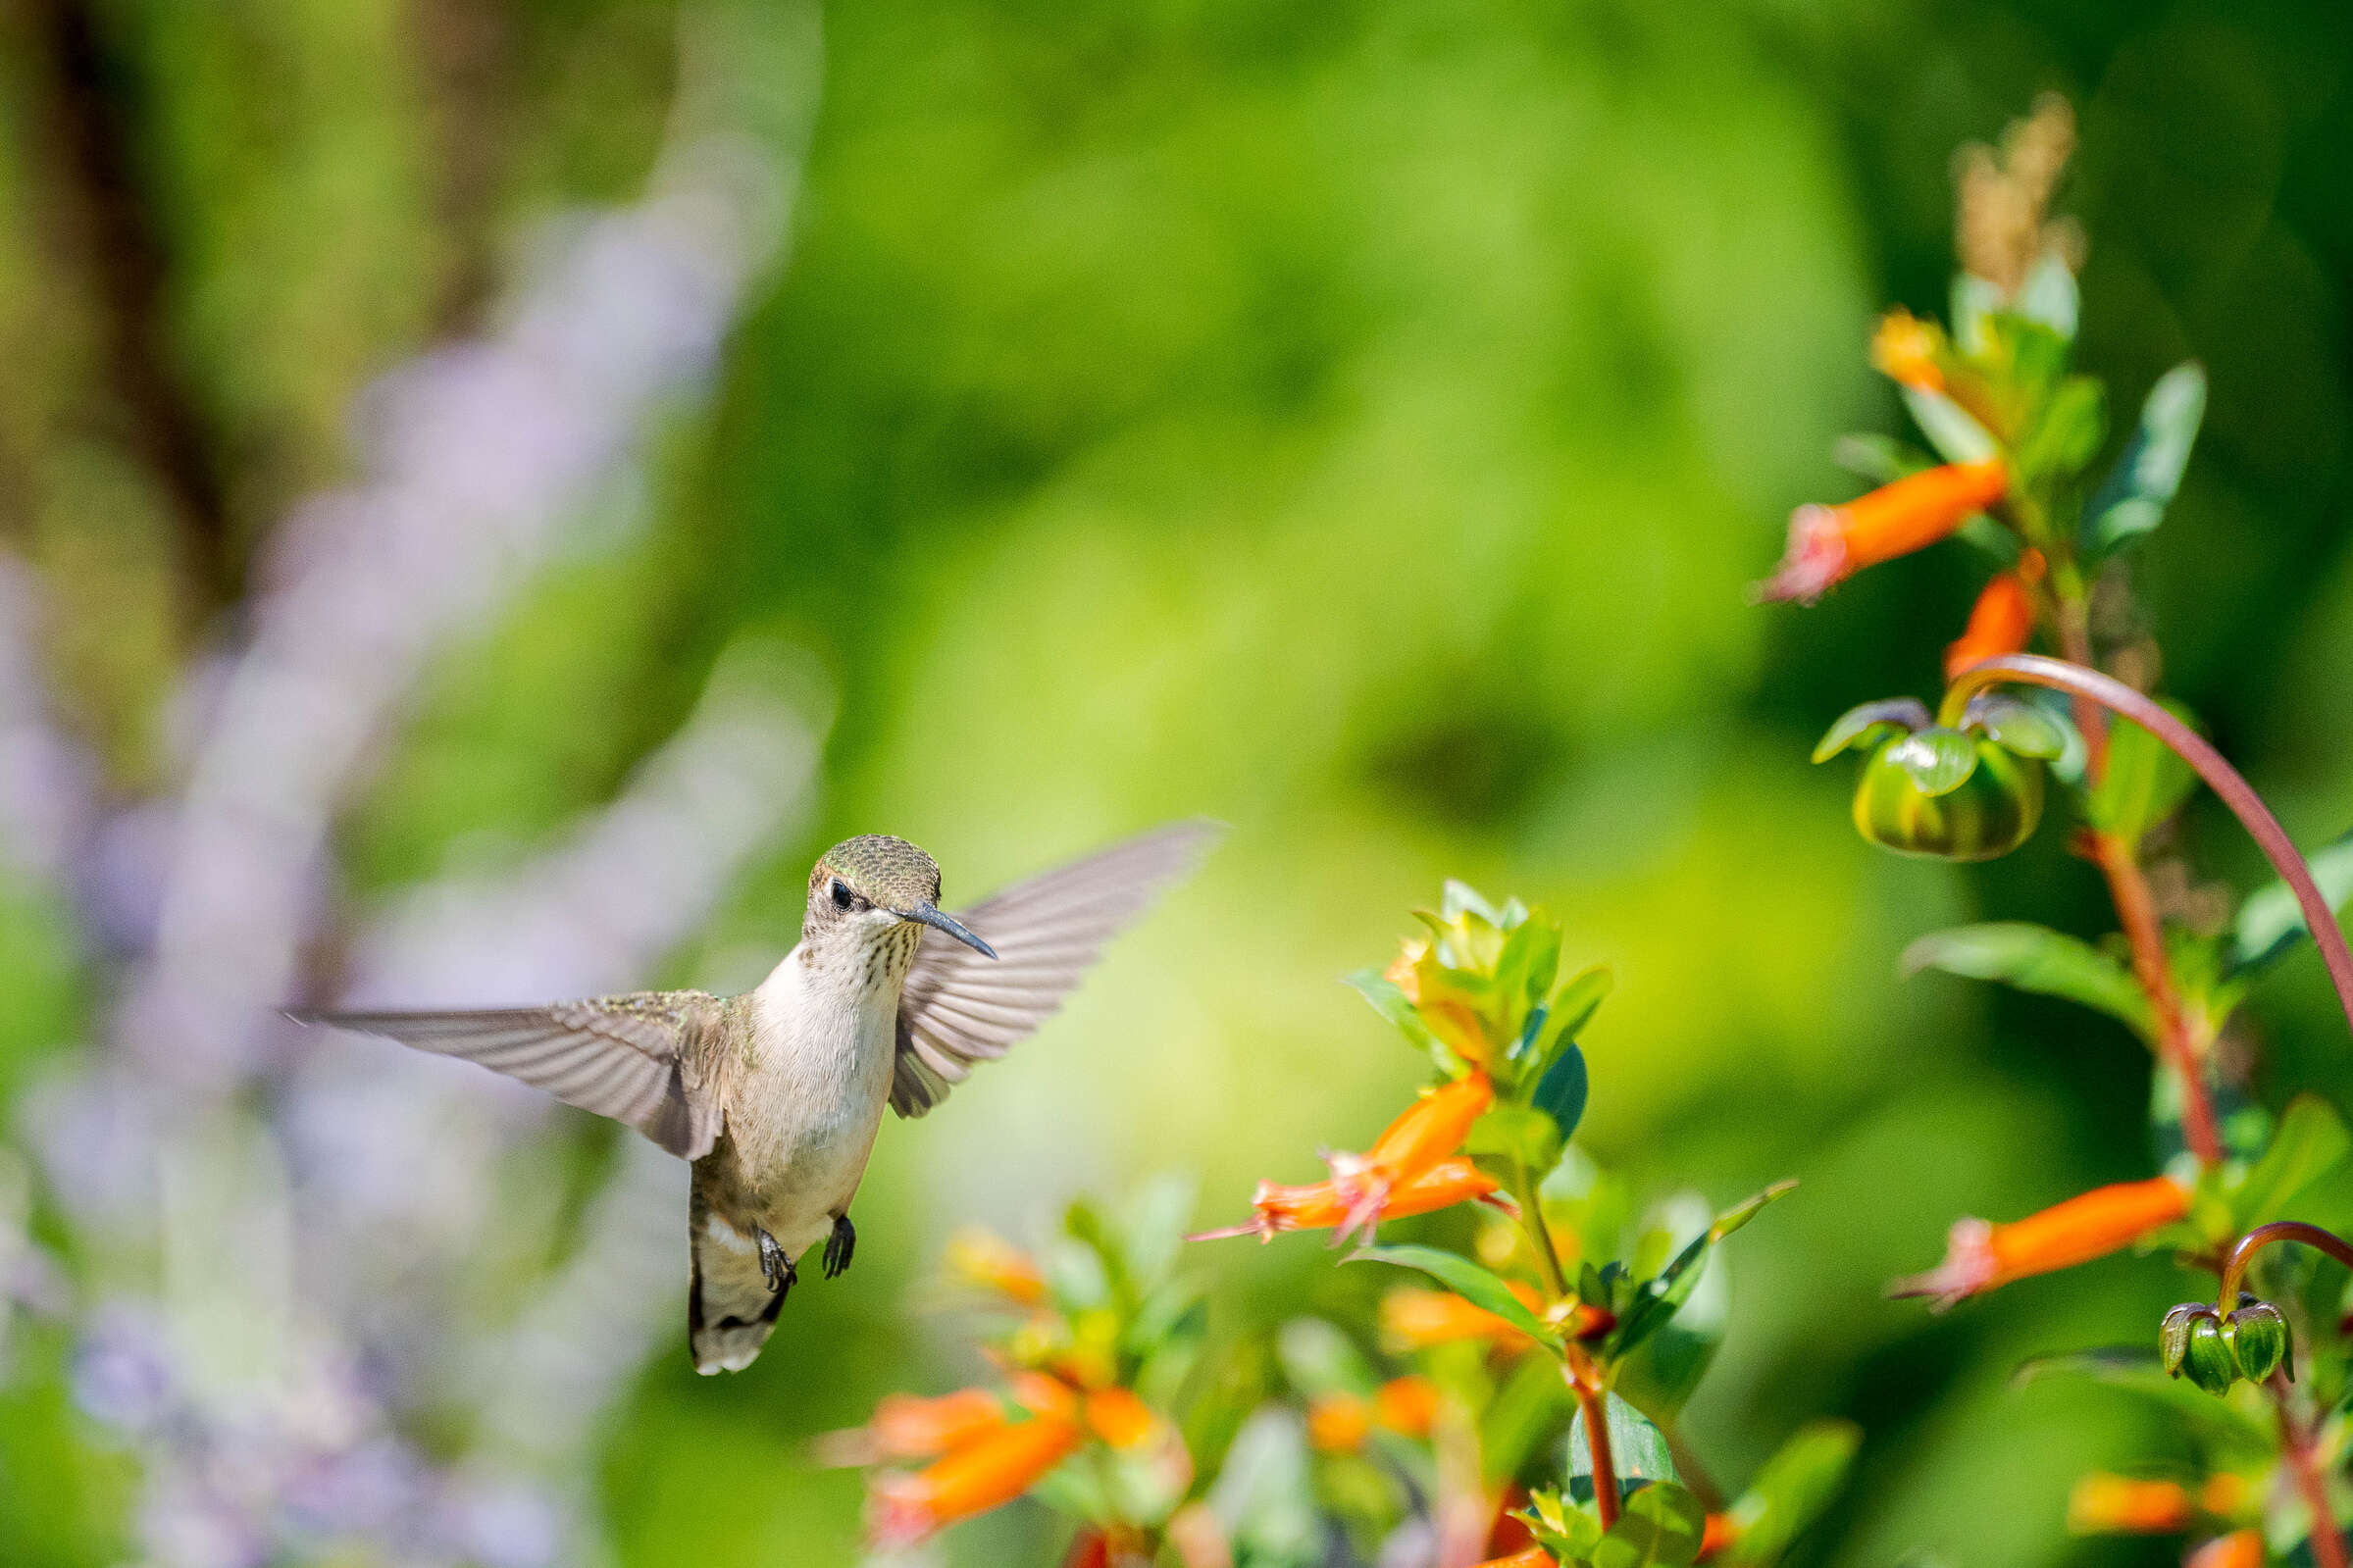 A hummingbird faces the camera as it hovers among orange flowers